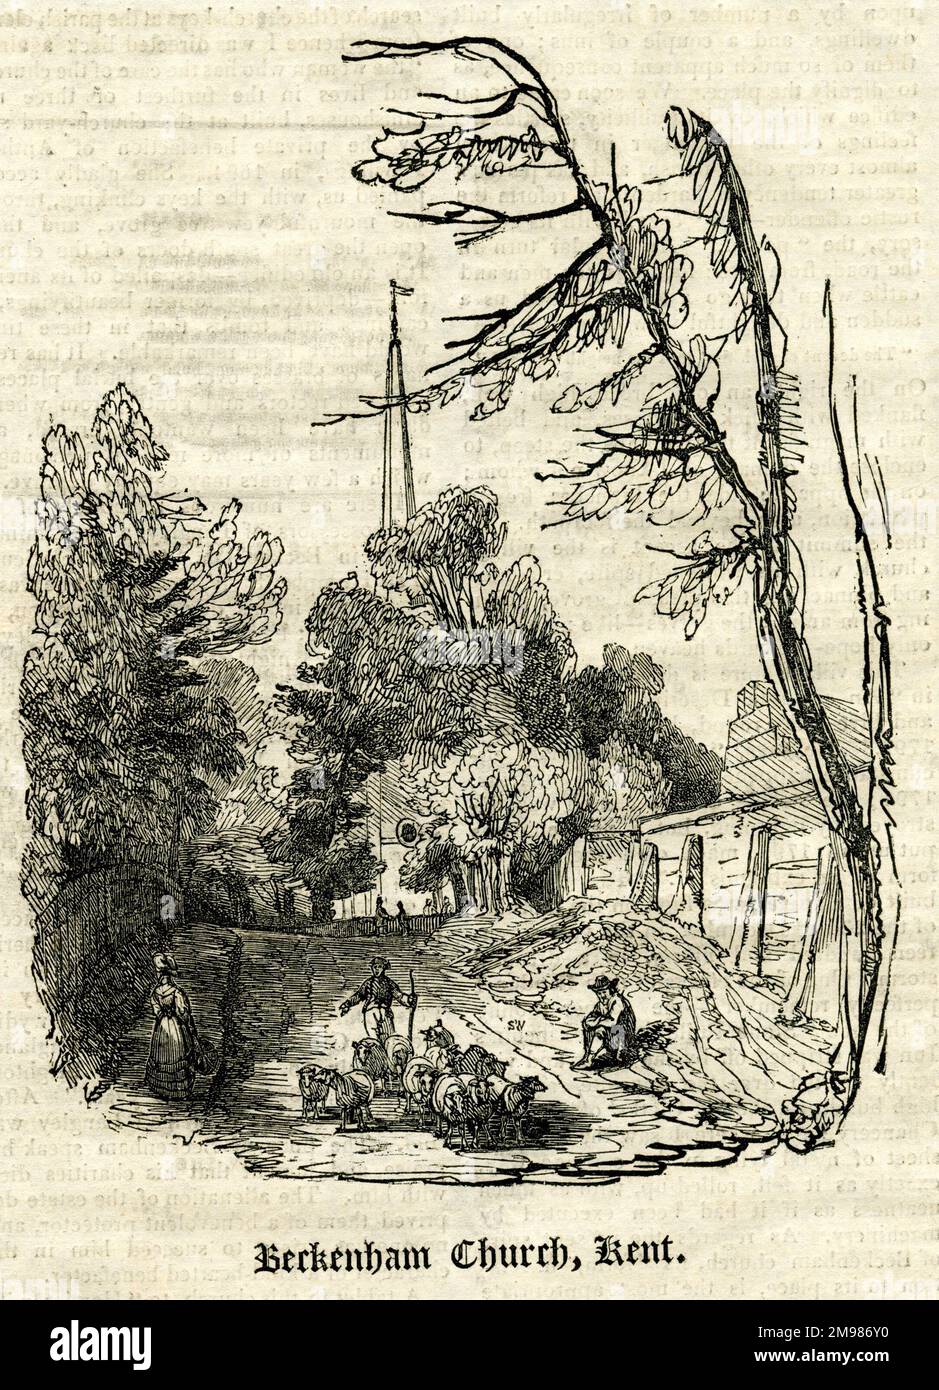 St George's Church, Beckenham, Kent (south-east London). Depicted here before December 1790, when a storm destroyed the steeple. Stock Photo